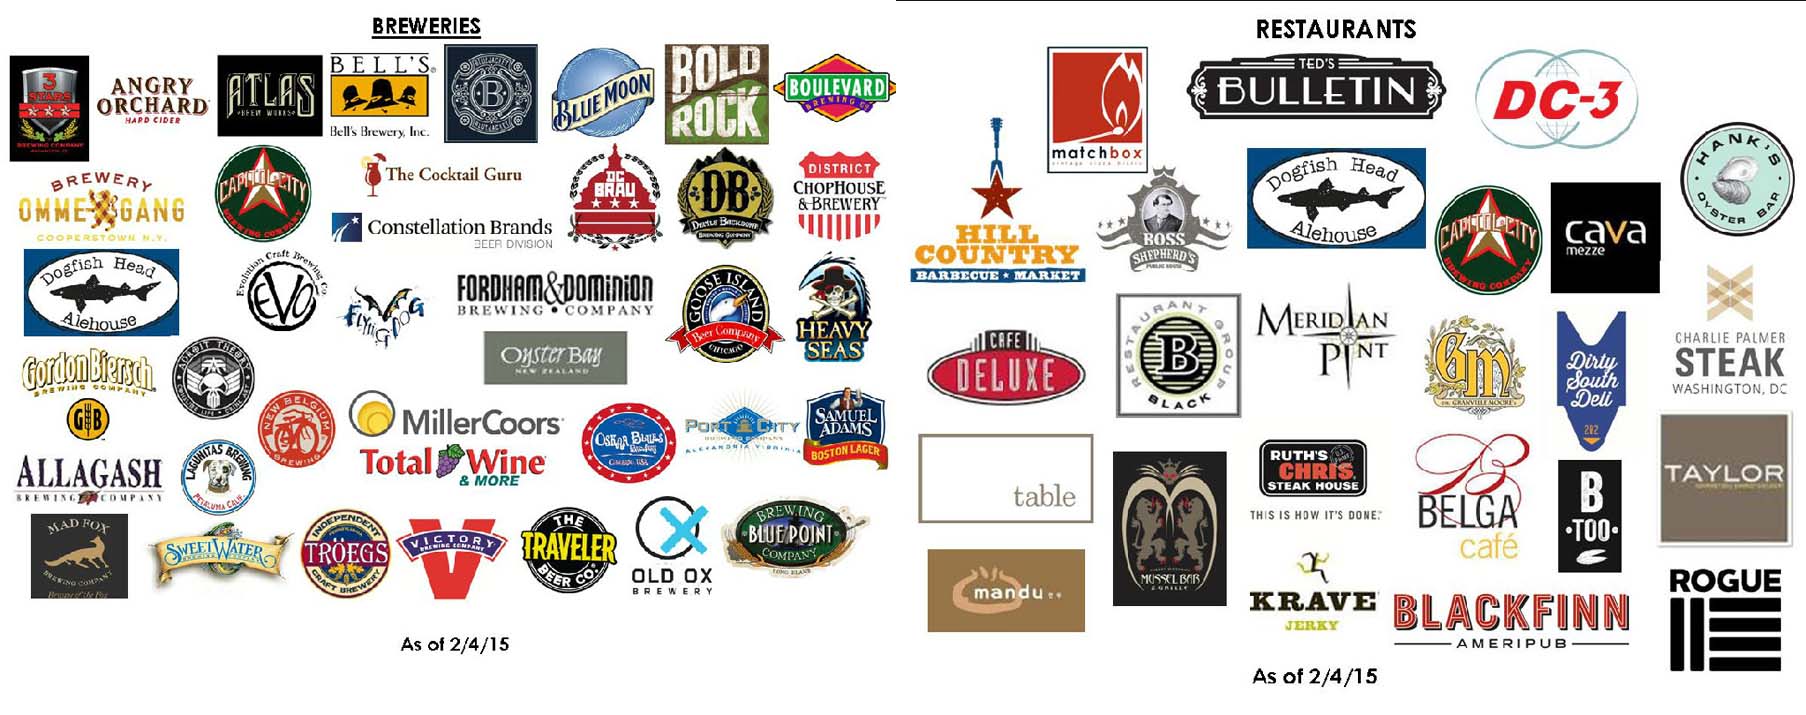 Participating breweries and restaurants